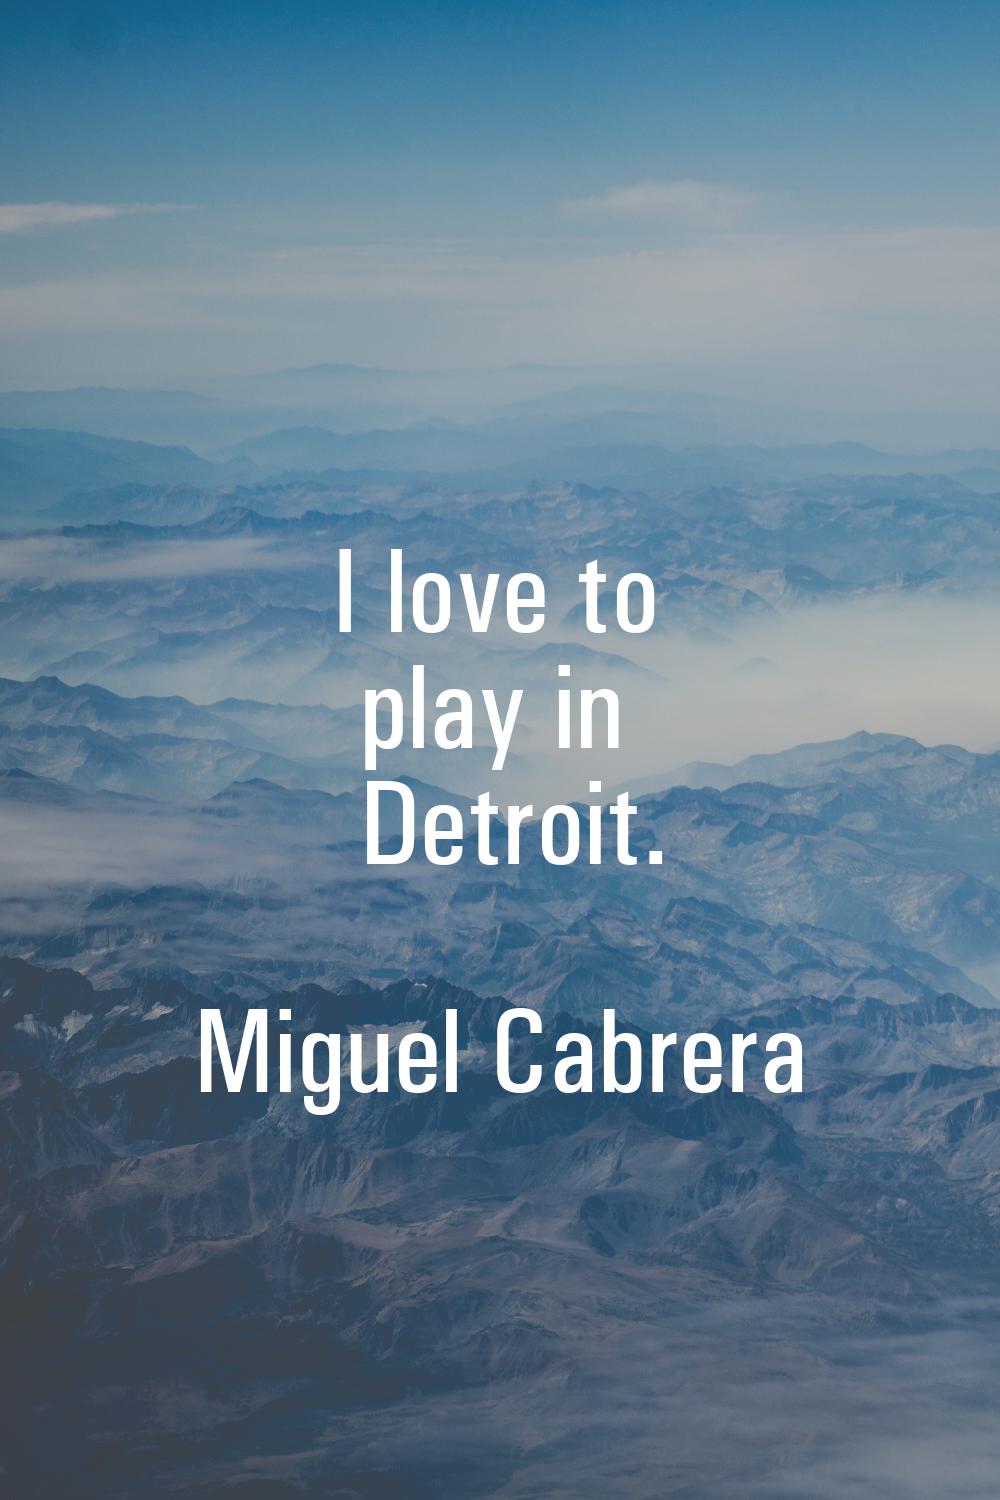 I love to play in Detroit.